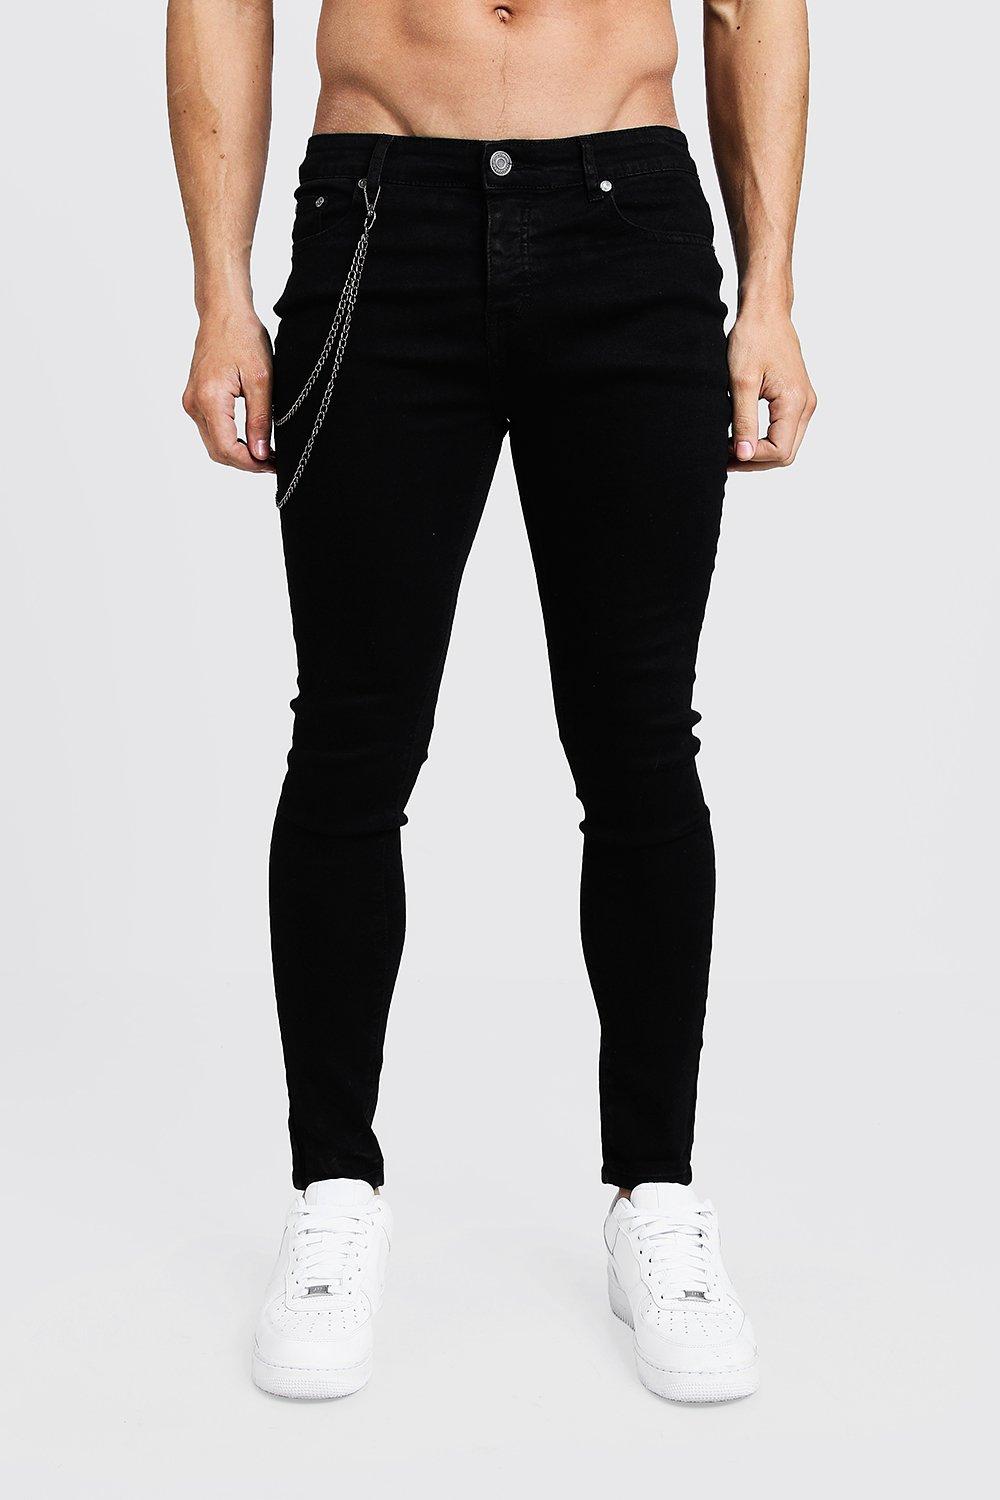 wild fable black jeans